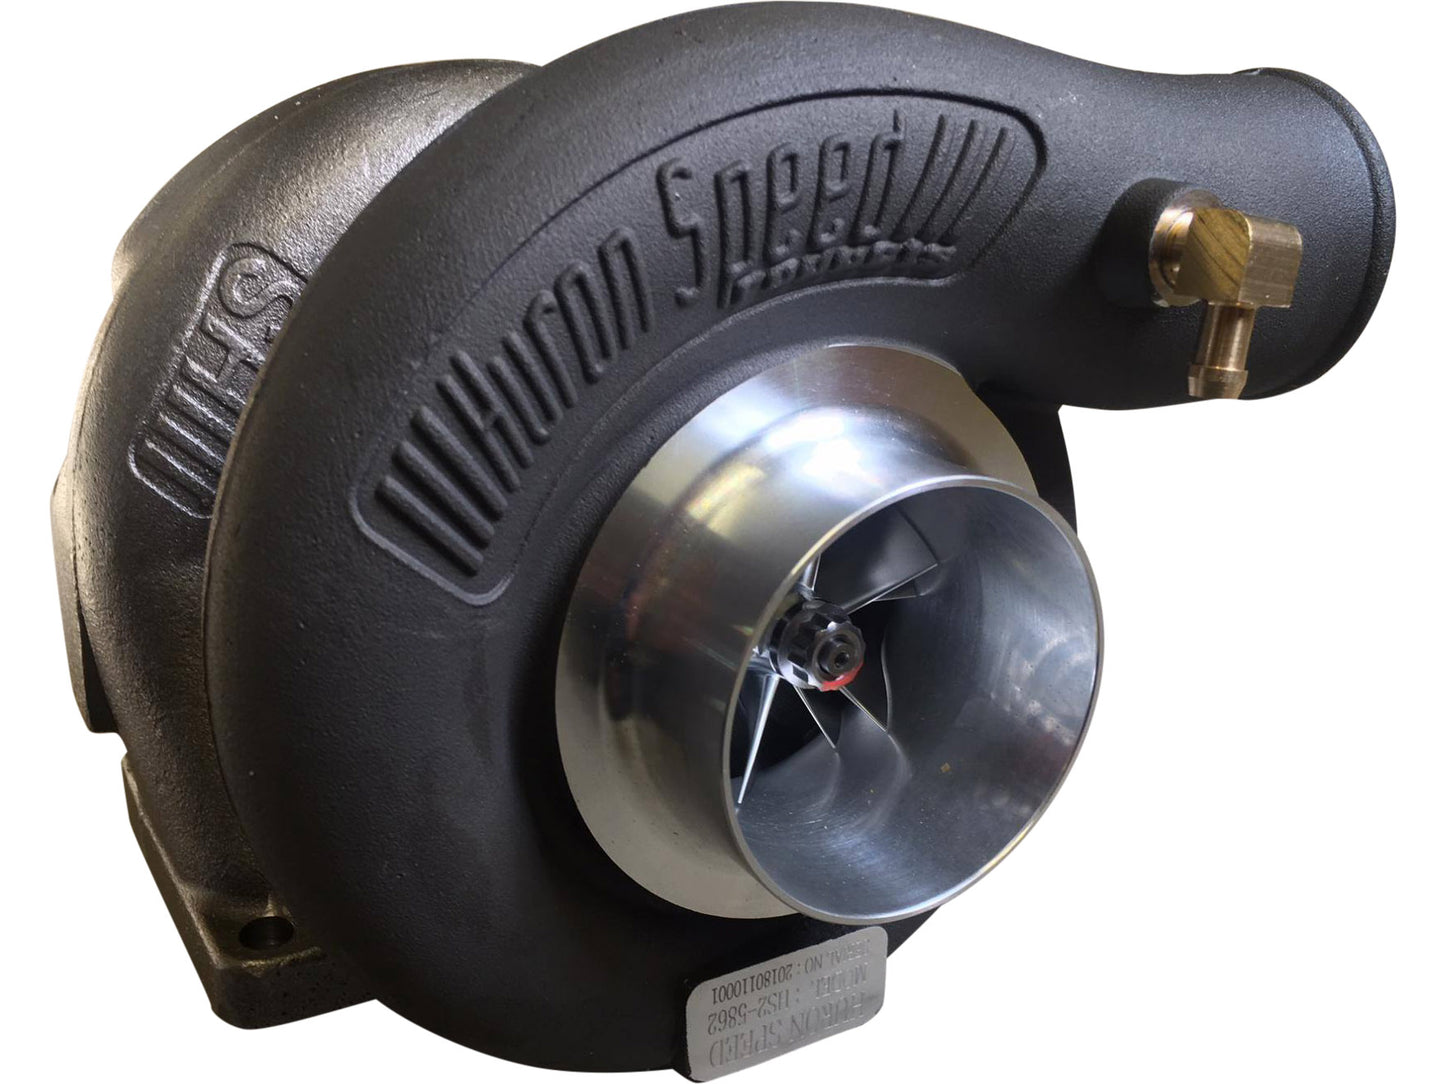 Huron Speed Billet 6162 APS GT35 Style BB Turbocharger